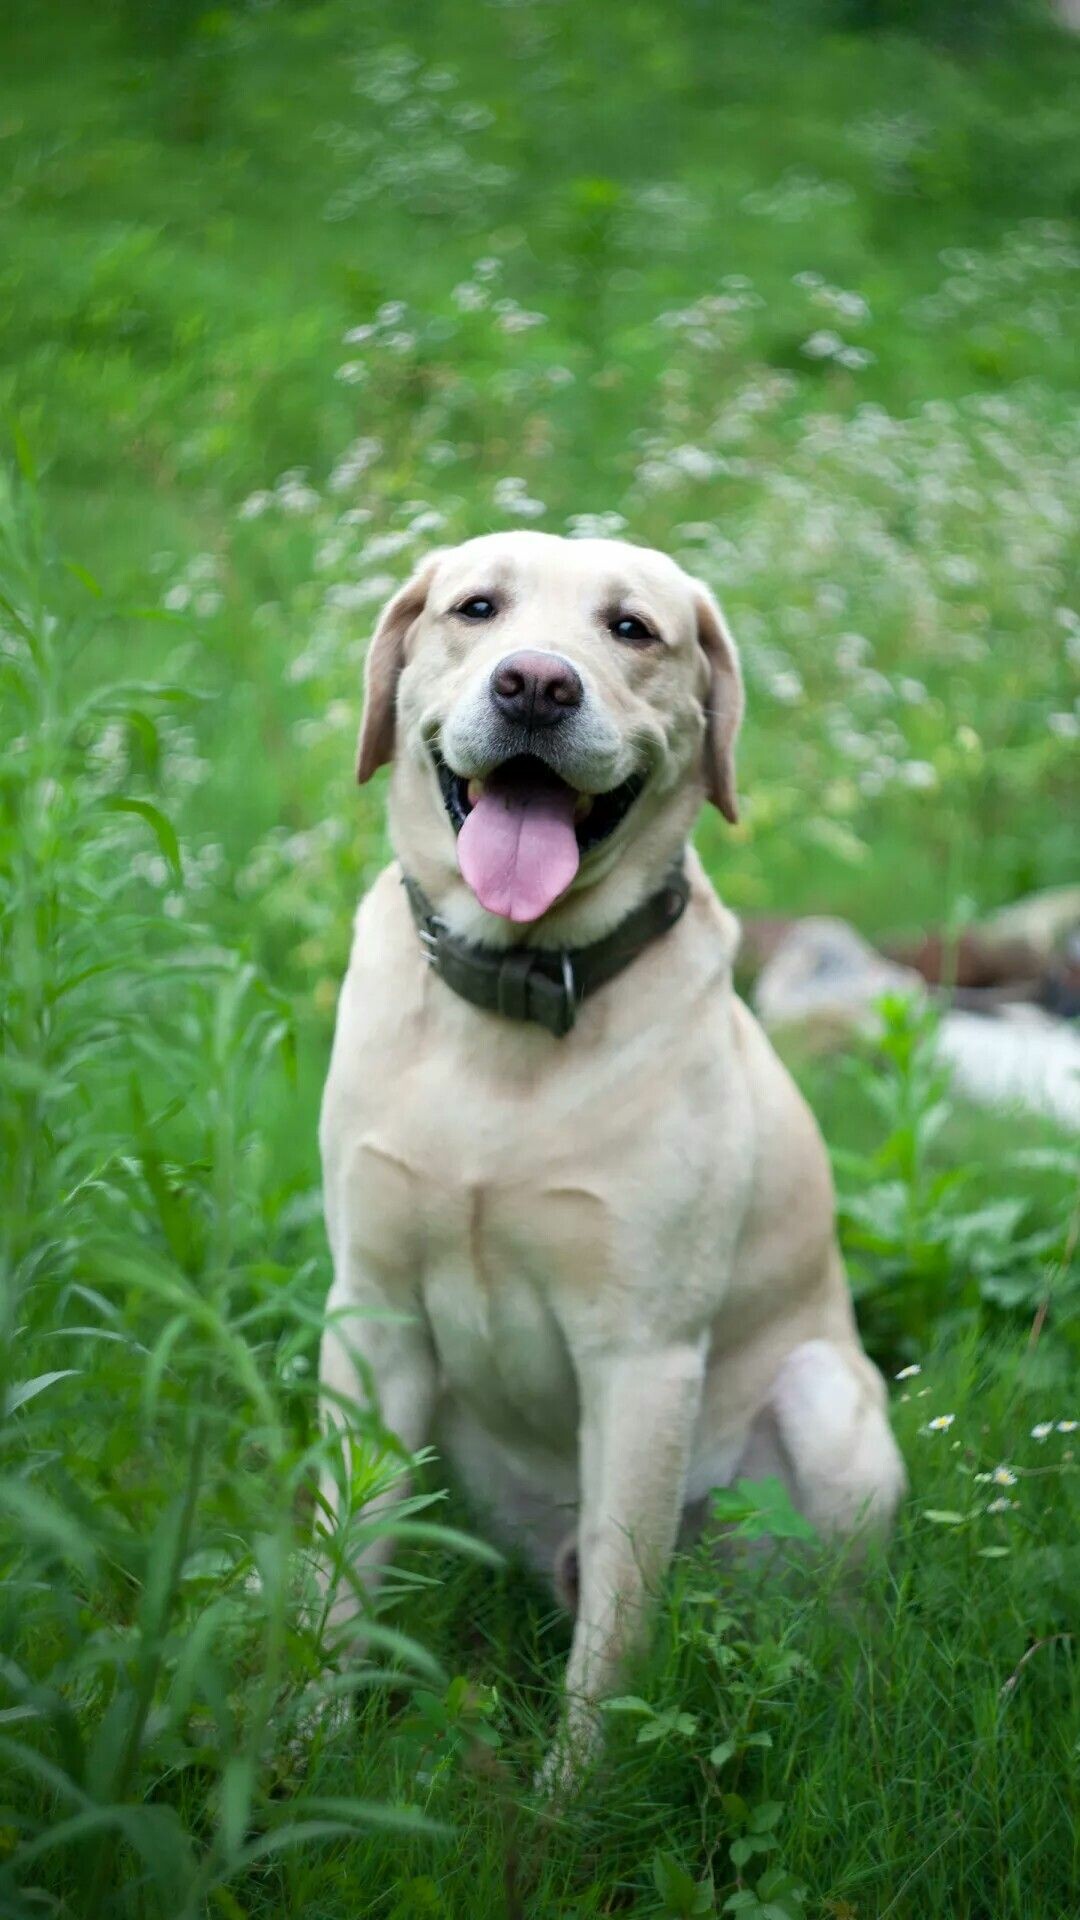 Labrador Retriever: Can be trained as a guide or assistance dog. 1080x1920 Full HD Wallpaper.